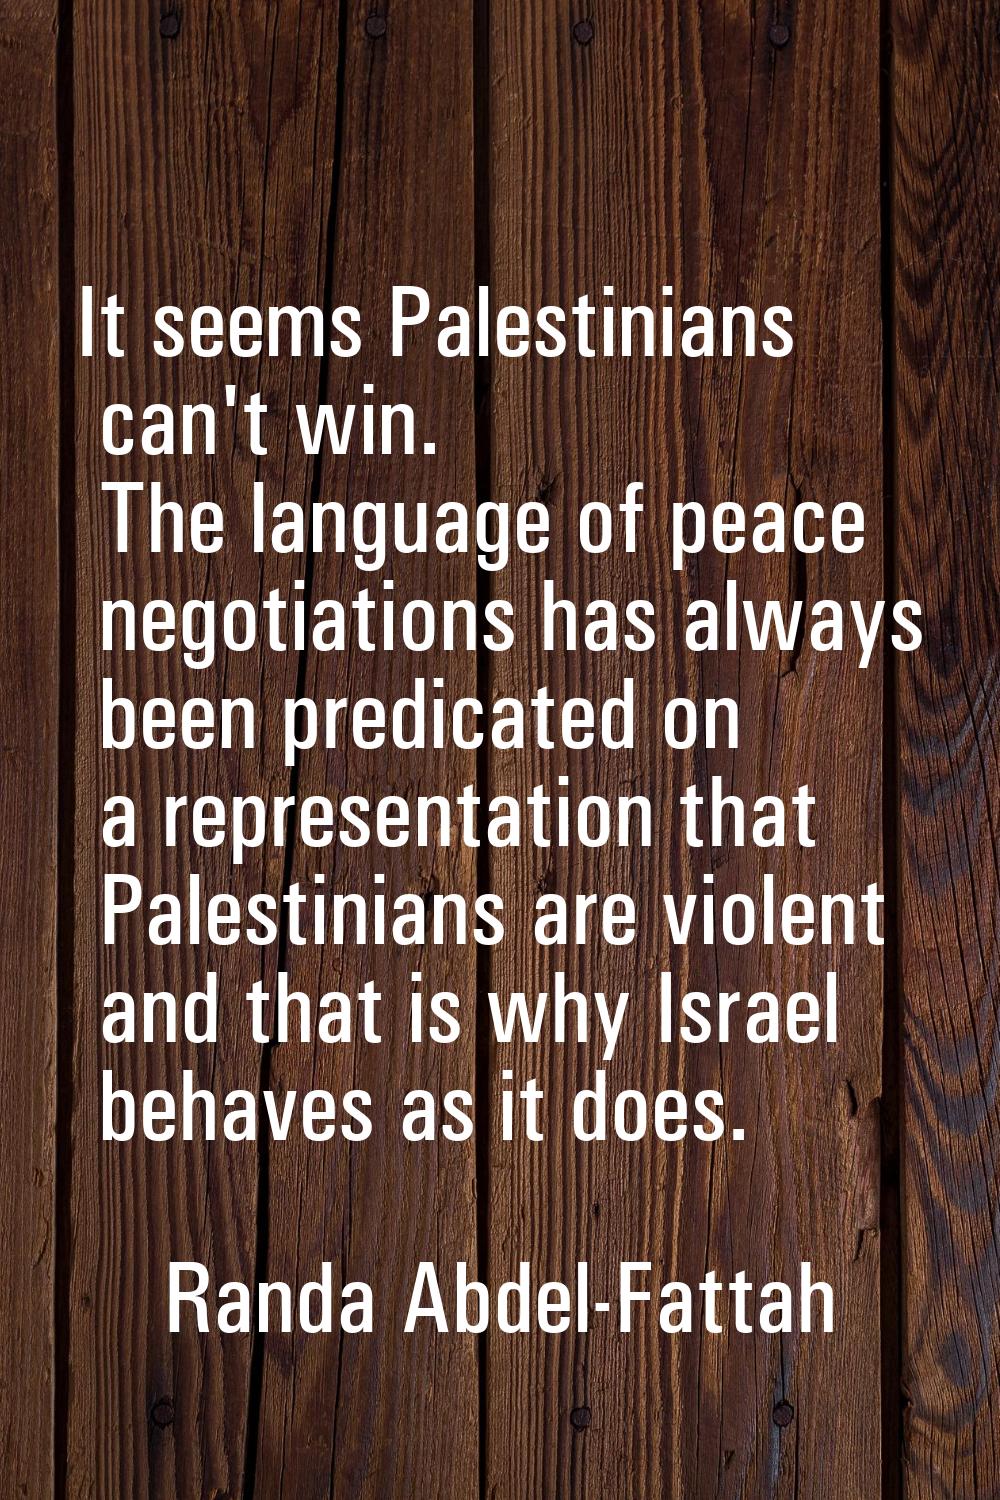 It seems Palestinians can't win. The language of peace negotiations has always been predicated on a